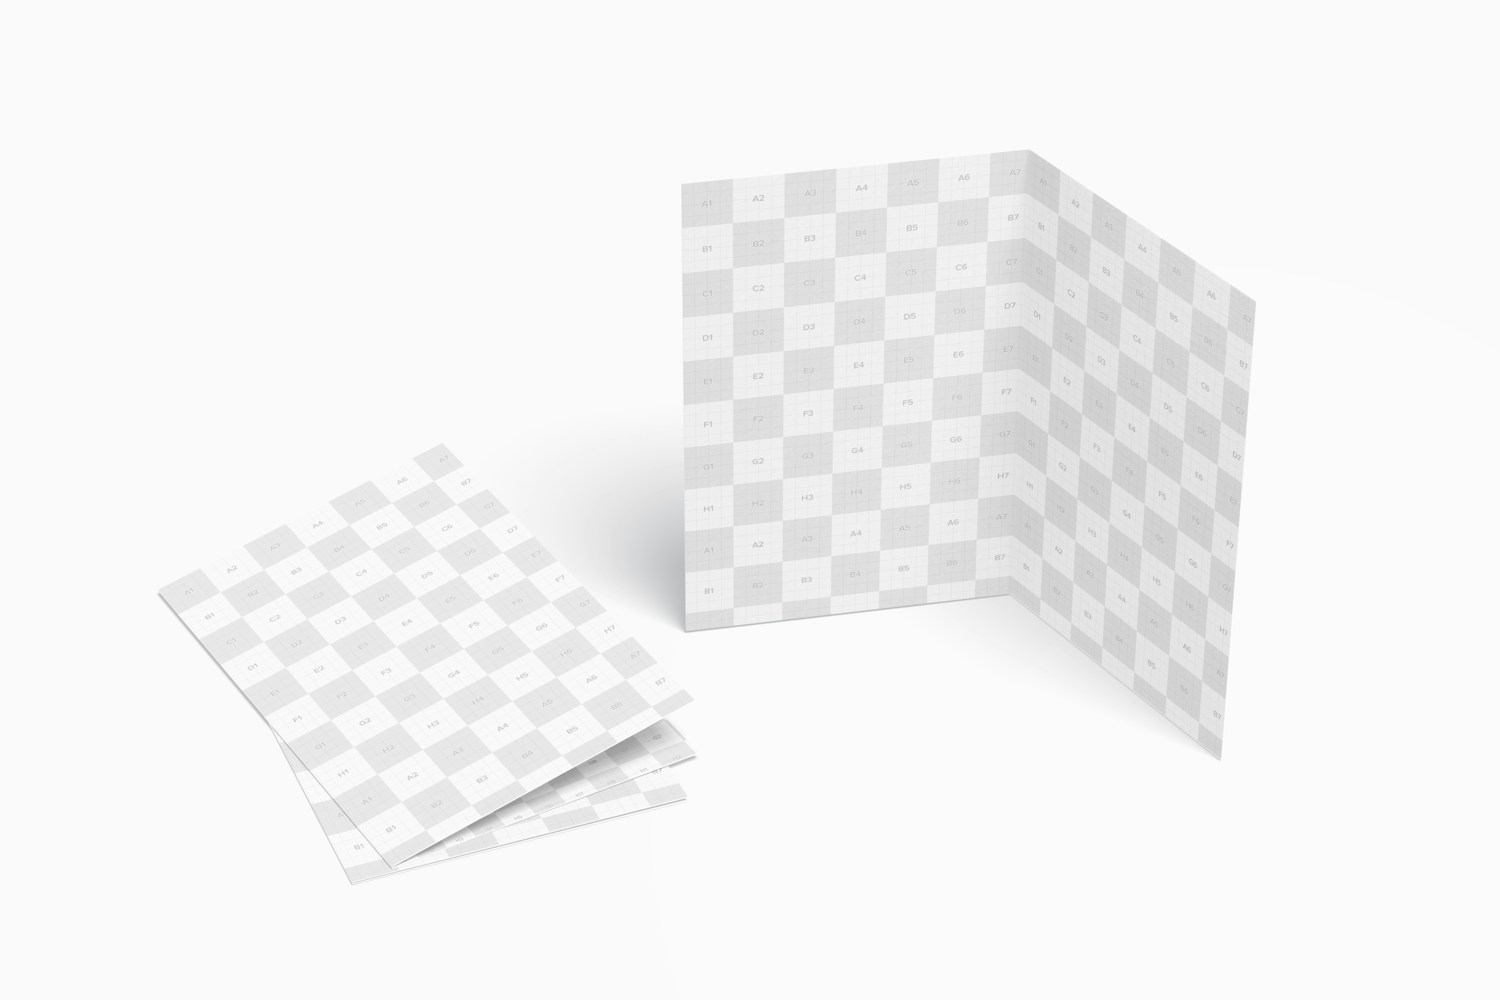 Folding Business Cards Mockup, Closed and Opened